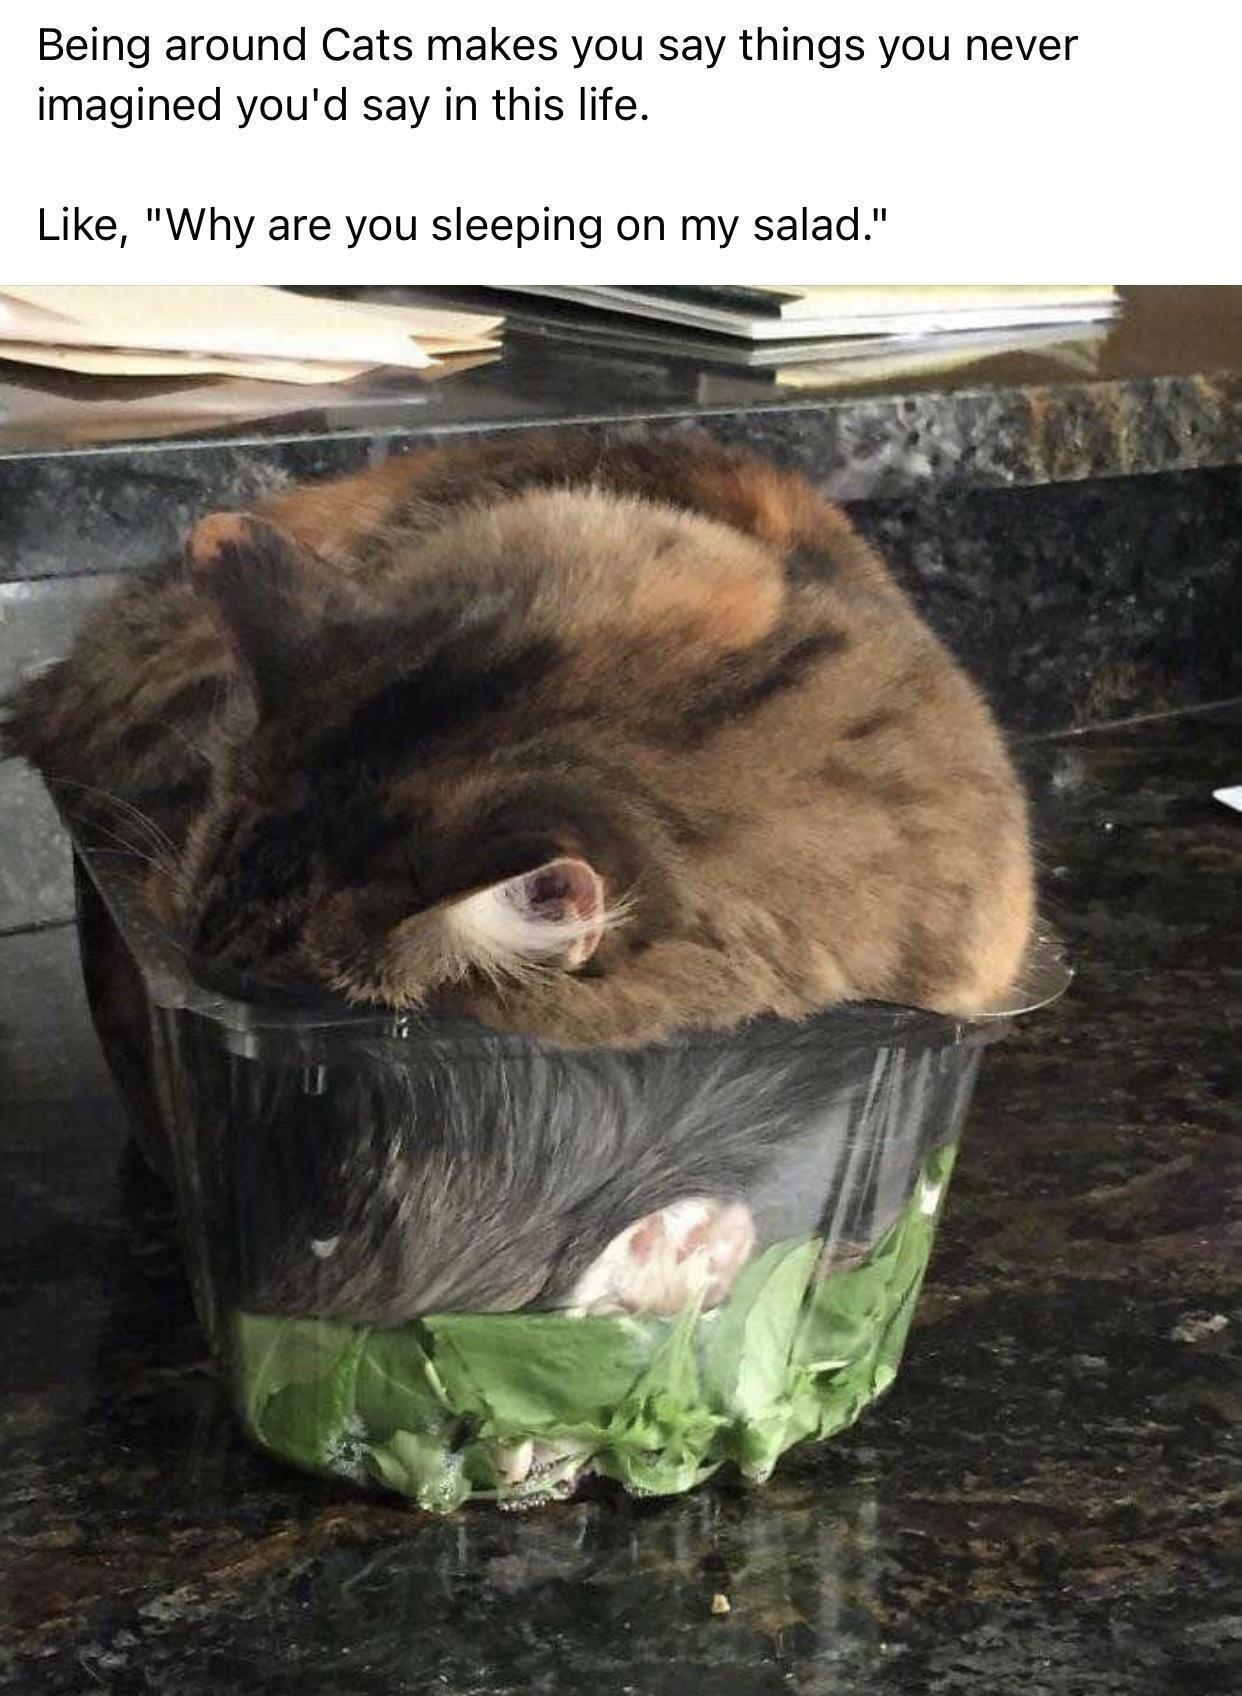 fresh memes - - you sleeping on my salad - Being around Cats makes you say things you never imagined you'd say in this life. , "Why are you sleeping on my salad."